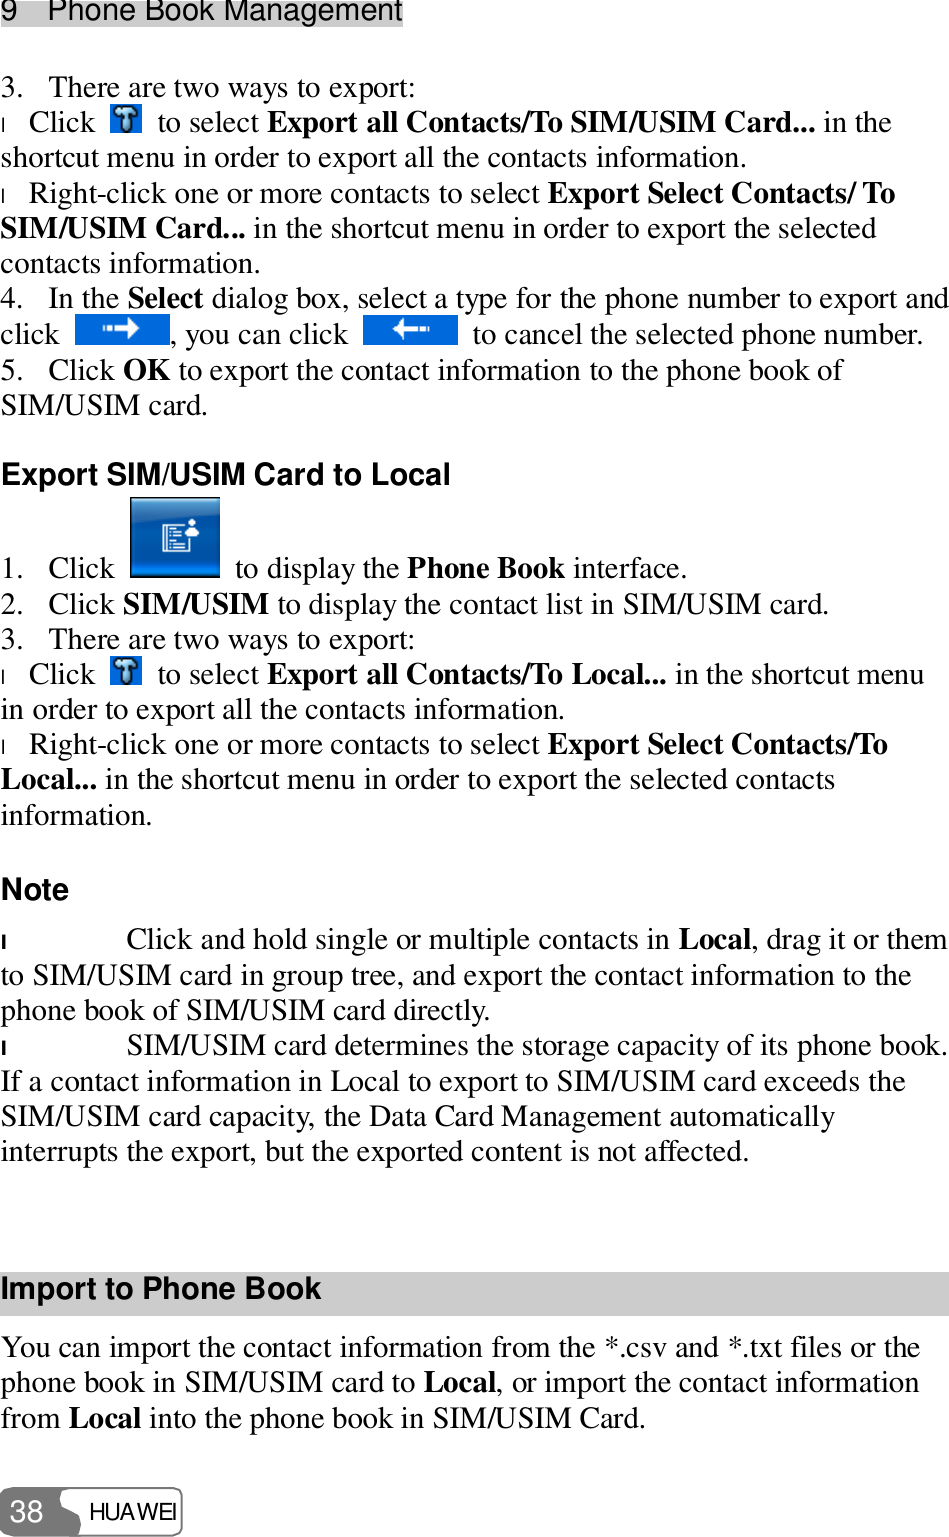 9  Phone Book Management HUAWEI  38 3. There are two ways to export: l Click   to select Export all Contacts/To SIM/USIM Card... in the shortcut menu in order to export all the contacts information. l Right-click one or more contacts to select Export Select Contacts/ To SIM/USIM Card... in the shortcut menu in order to export the selected contacts information. 4. In the Select dialog box, select a type for the phone number to export and click  , you can click   to cancel the selected phone number. 5. Click OK to export the contact information to the phone book of SIM/USIM card. Export SIM/USIM Card to Local 1. Click   to display the Phone Book interface. 2. Click SIM/USIM to display the contact list in SIM/USIM card. 3. There are two ways to export: l Click   to select Export all Contacts/To Local... in the shortcut menu in order to export all the contacts information. l Right-click one or more contacts to select Export Select Contacts/To Local... in the shortcut menu in order to export the selected contacts information. Note  l Click and hold single or multiple contacts in Local, drag it or them to SIM/USIM card in group tree, and export the contact information to the phone book of SIM/USIM card directly. l SIM/USIM card determines the storage capacity of its phone book. If a contact information in Local to export to SIM/USIM card exceeds the SIM/USIM card capacity, the Data Card Management automatically interrupts the export, but the exported content is not affected.  Import to Phone Book You can import the contact information from the *.csv and *.txt files or the phone book in SIM/USIM card to Local, or import the contact information from Local into the phone book in SIM/USIM Card. 